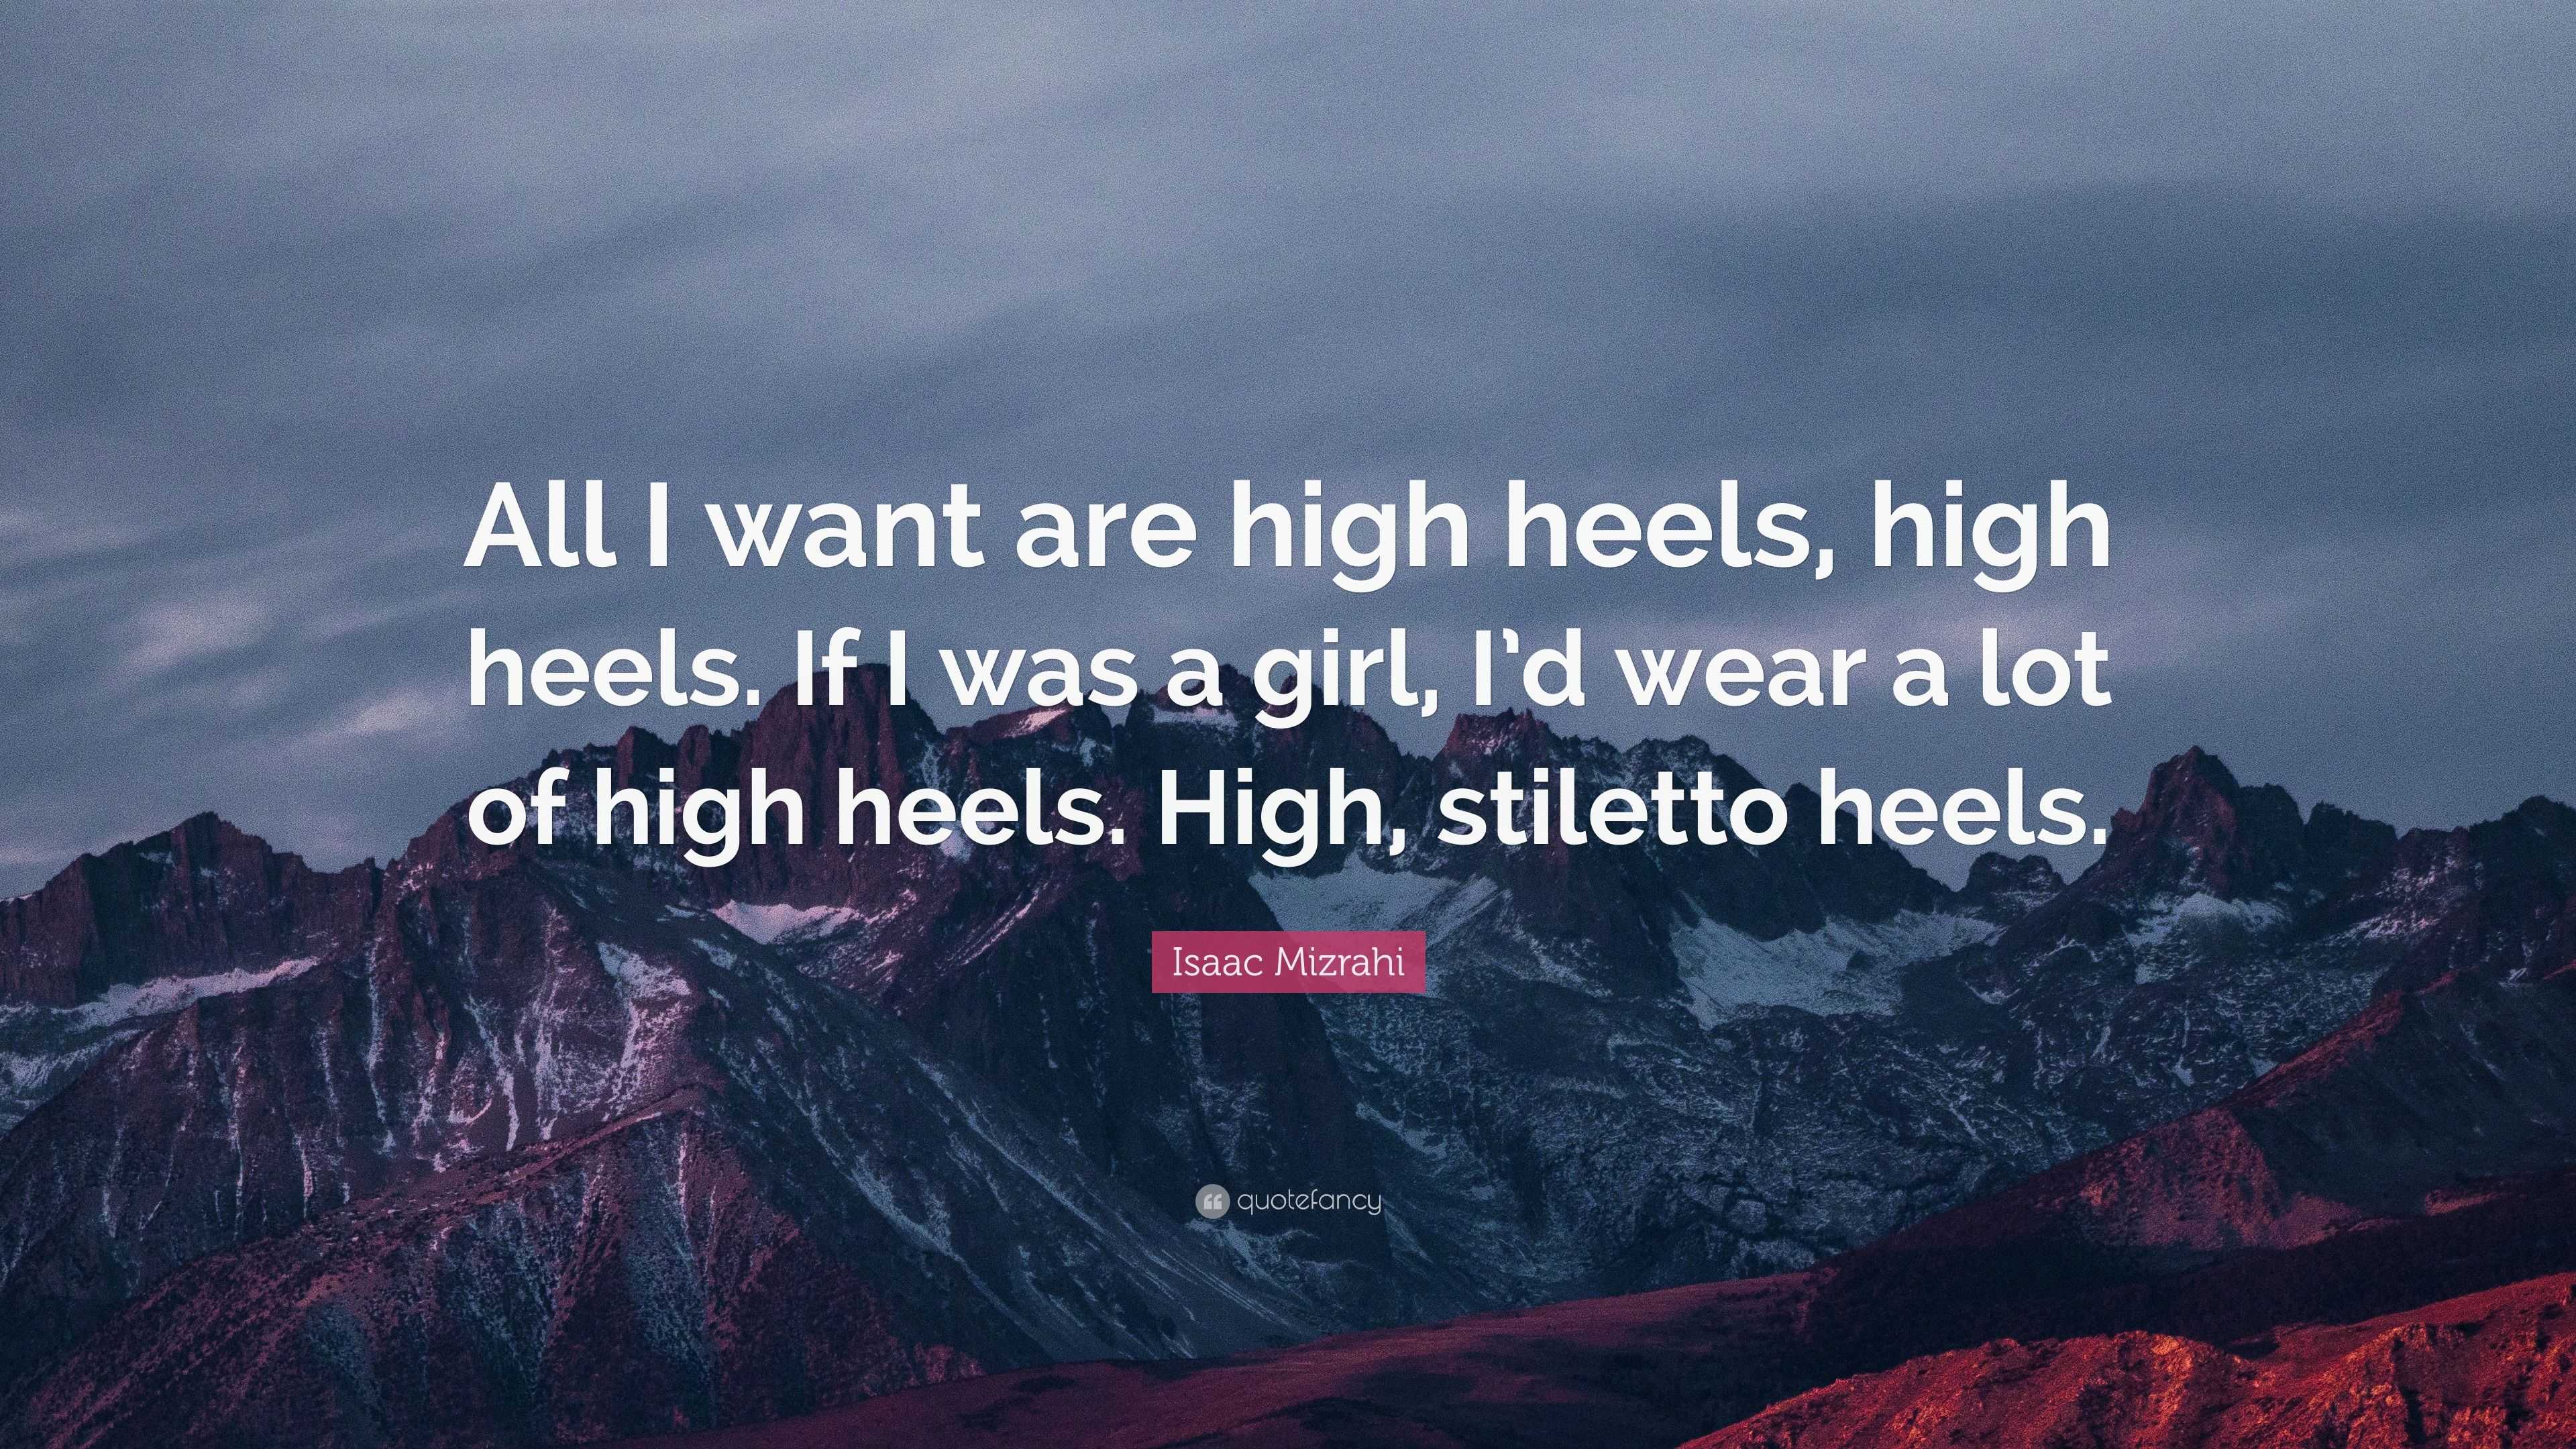 The Ultimate List Of Quotes For The Shoe Lover In All Of Us – Life Traveled  In Stilettos | Shoes quotes, Shoe lover, Heels quotes